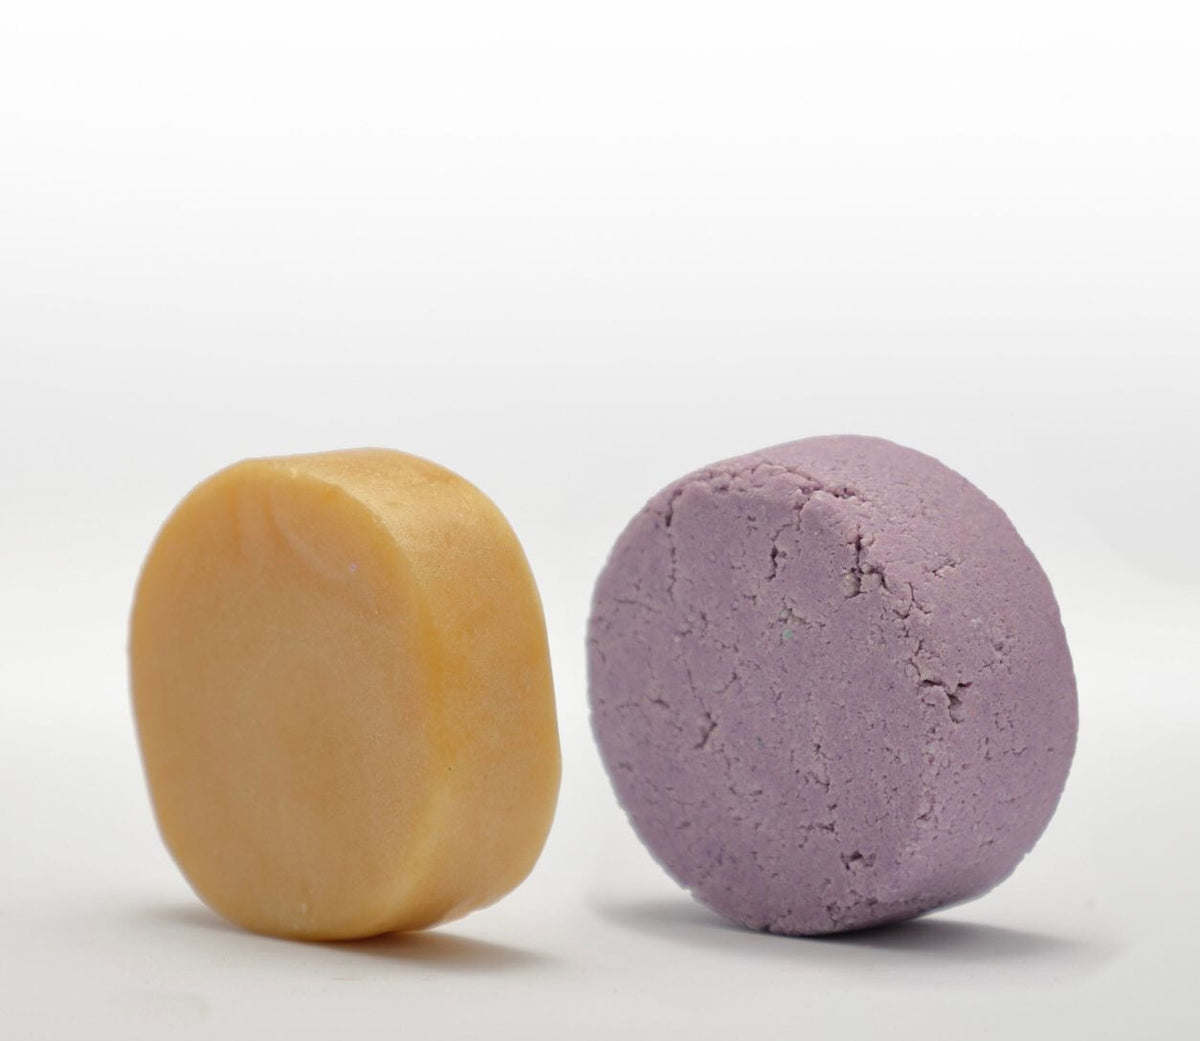 Two Shampoo Bar & Conditioner Bar Bundles on a white surface.